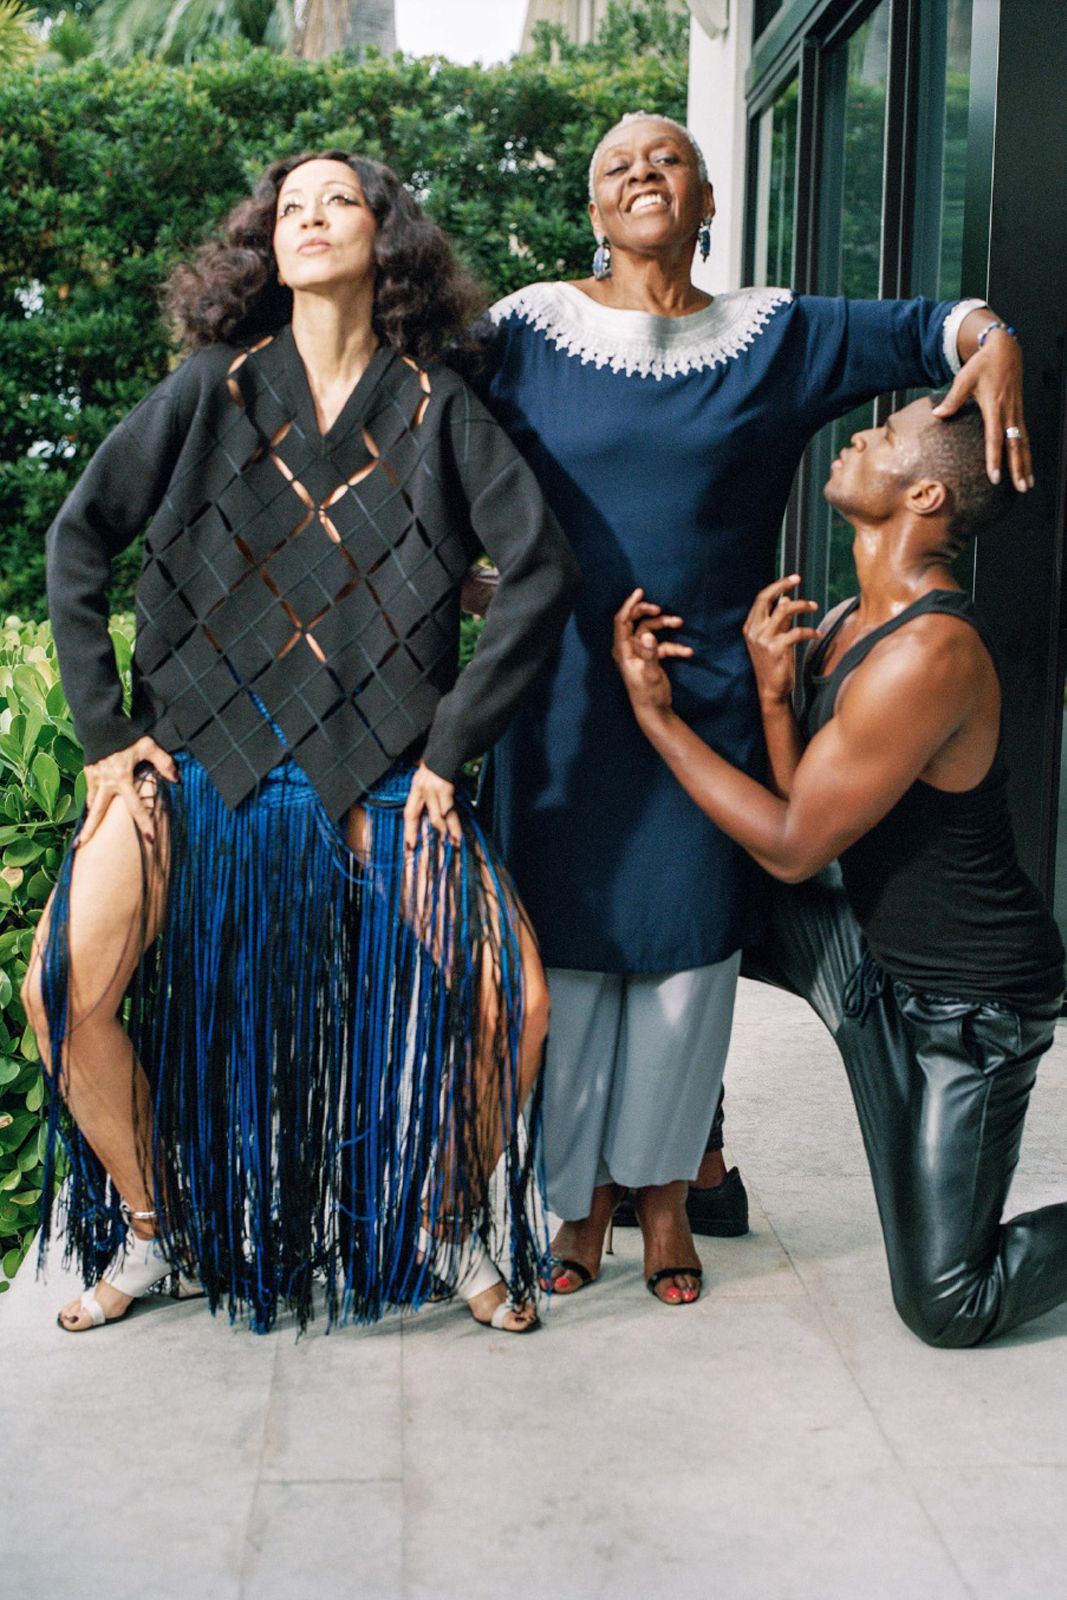 BH_2015_Barneys Better Than Ever Spring 15 Campaign by Bruce Weber_1.jpg